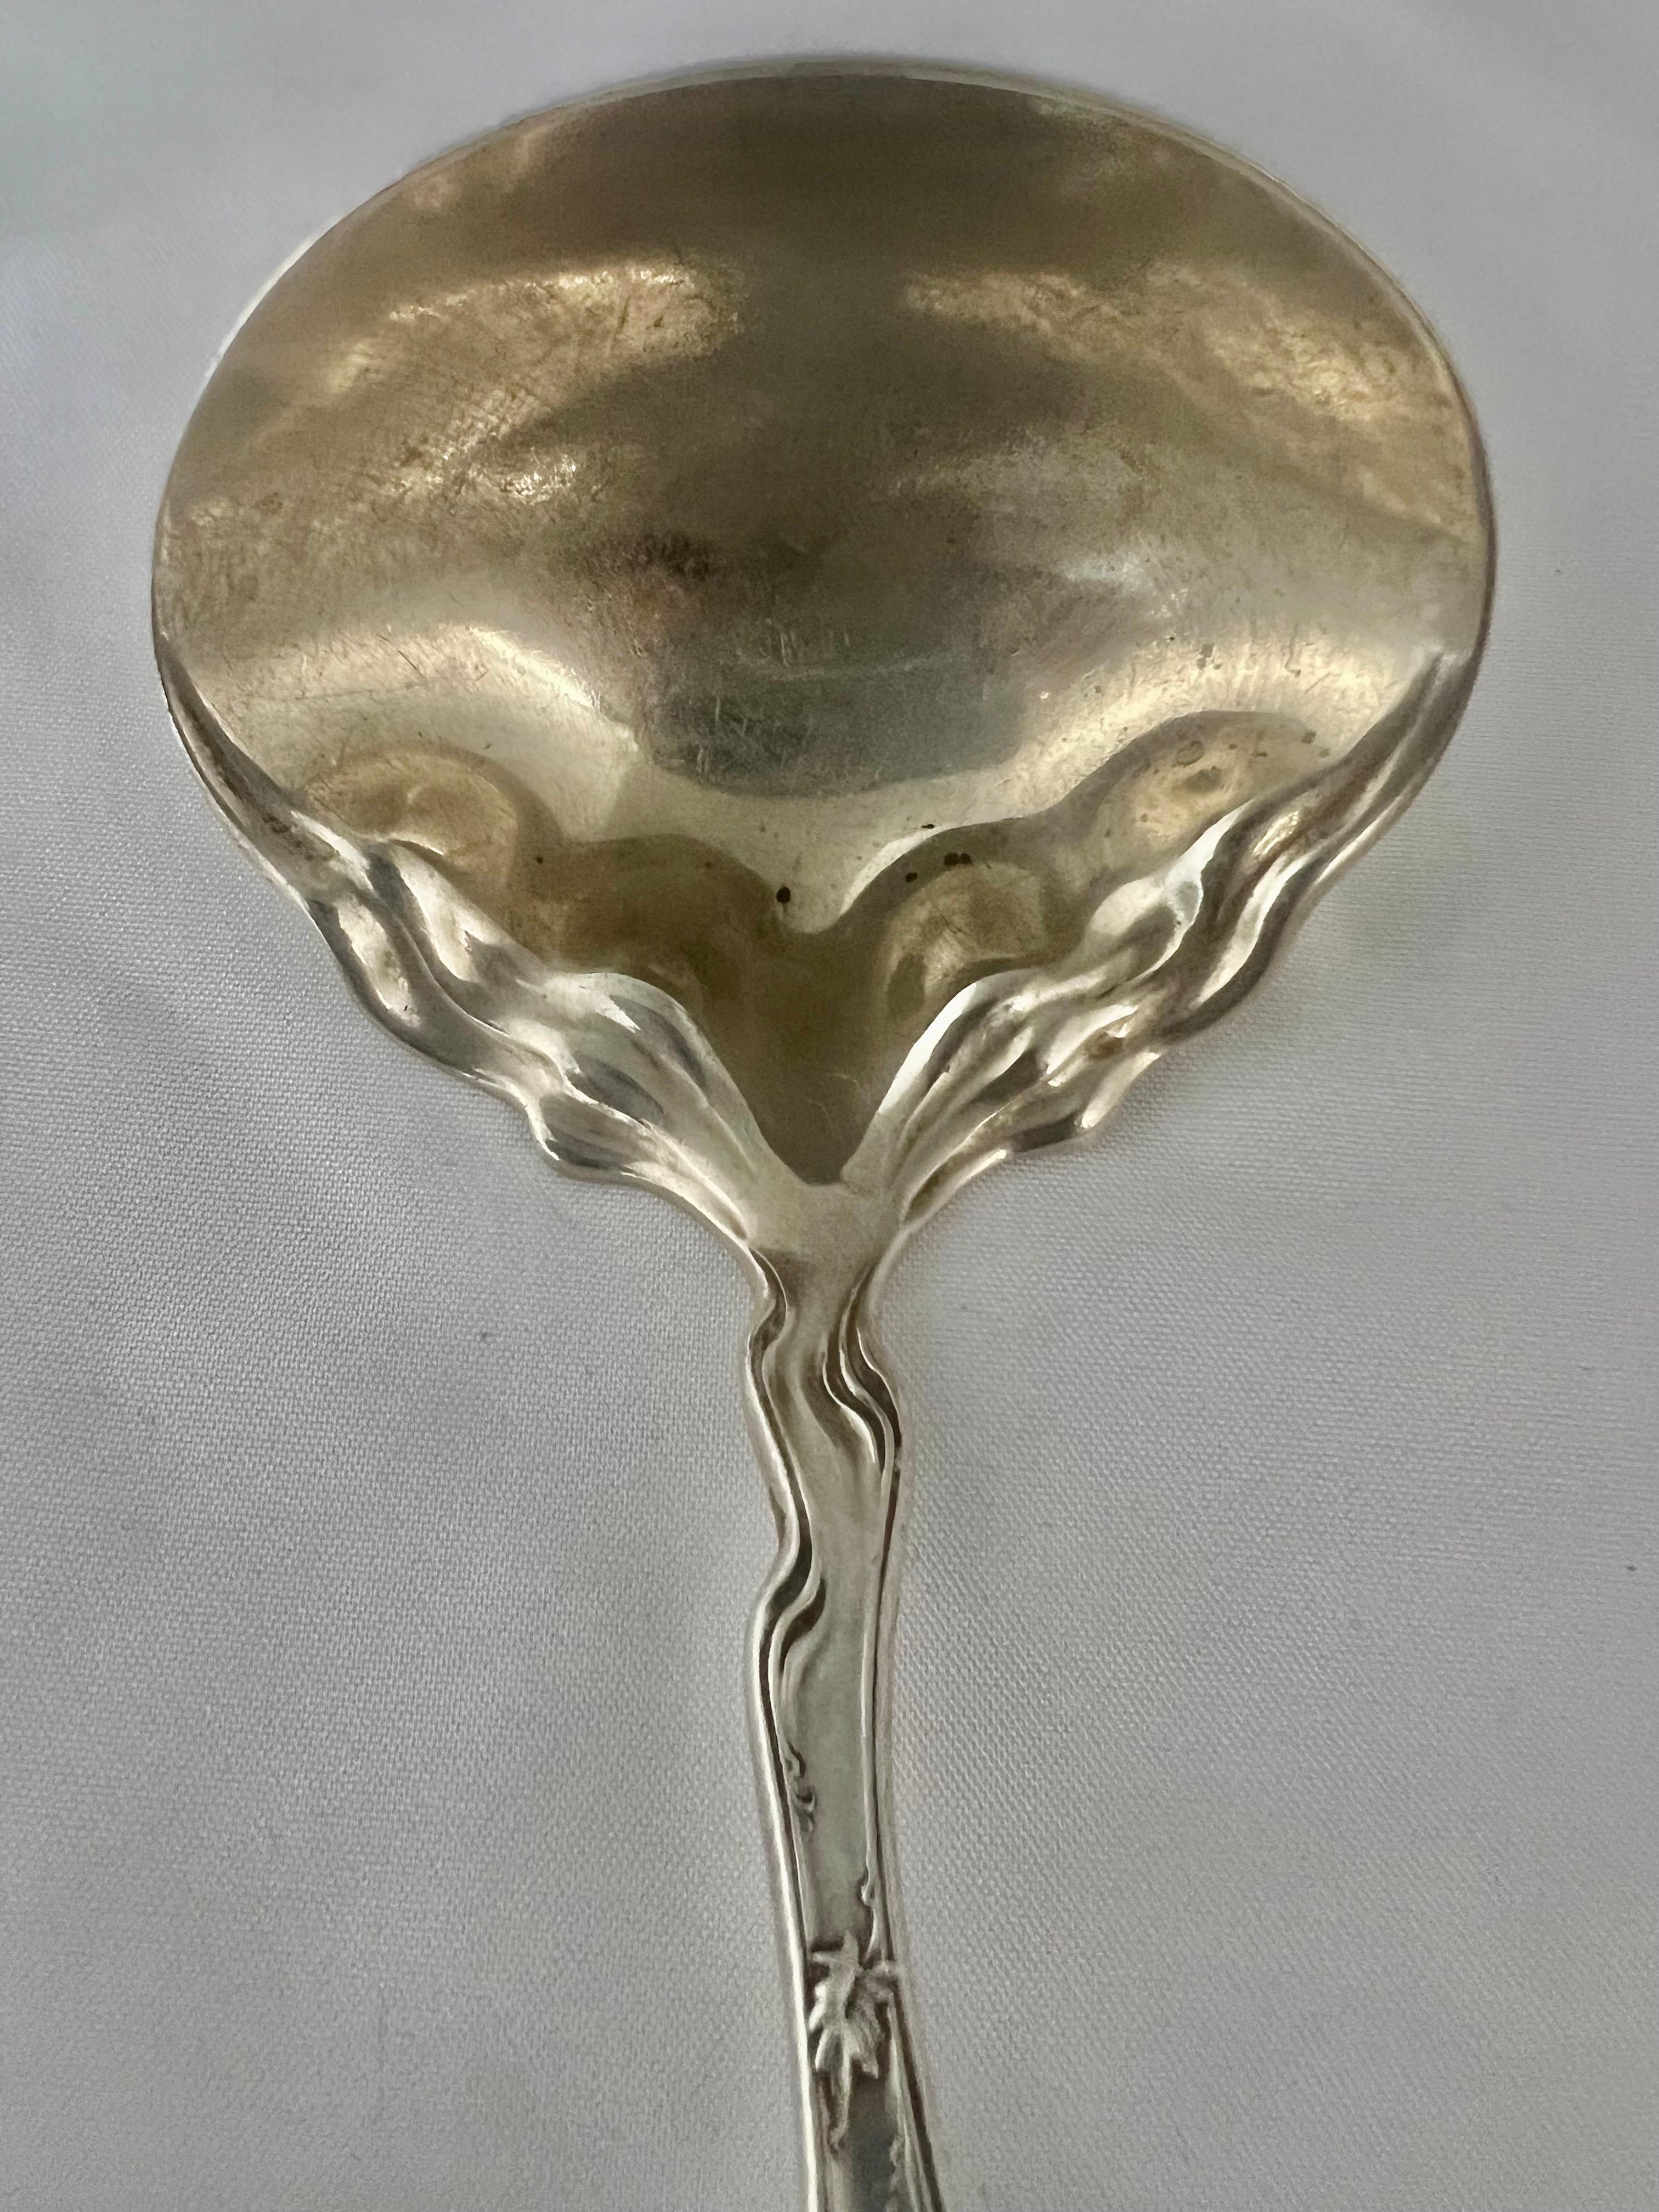 Art Nouveau Serving Spoon, George W. Shiebler & Co. In Good Condition For Sale In Los Angeles, CA